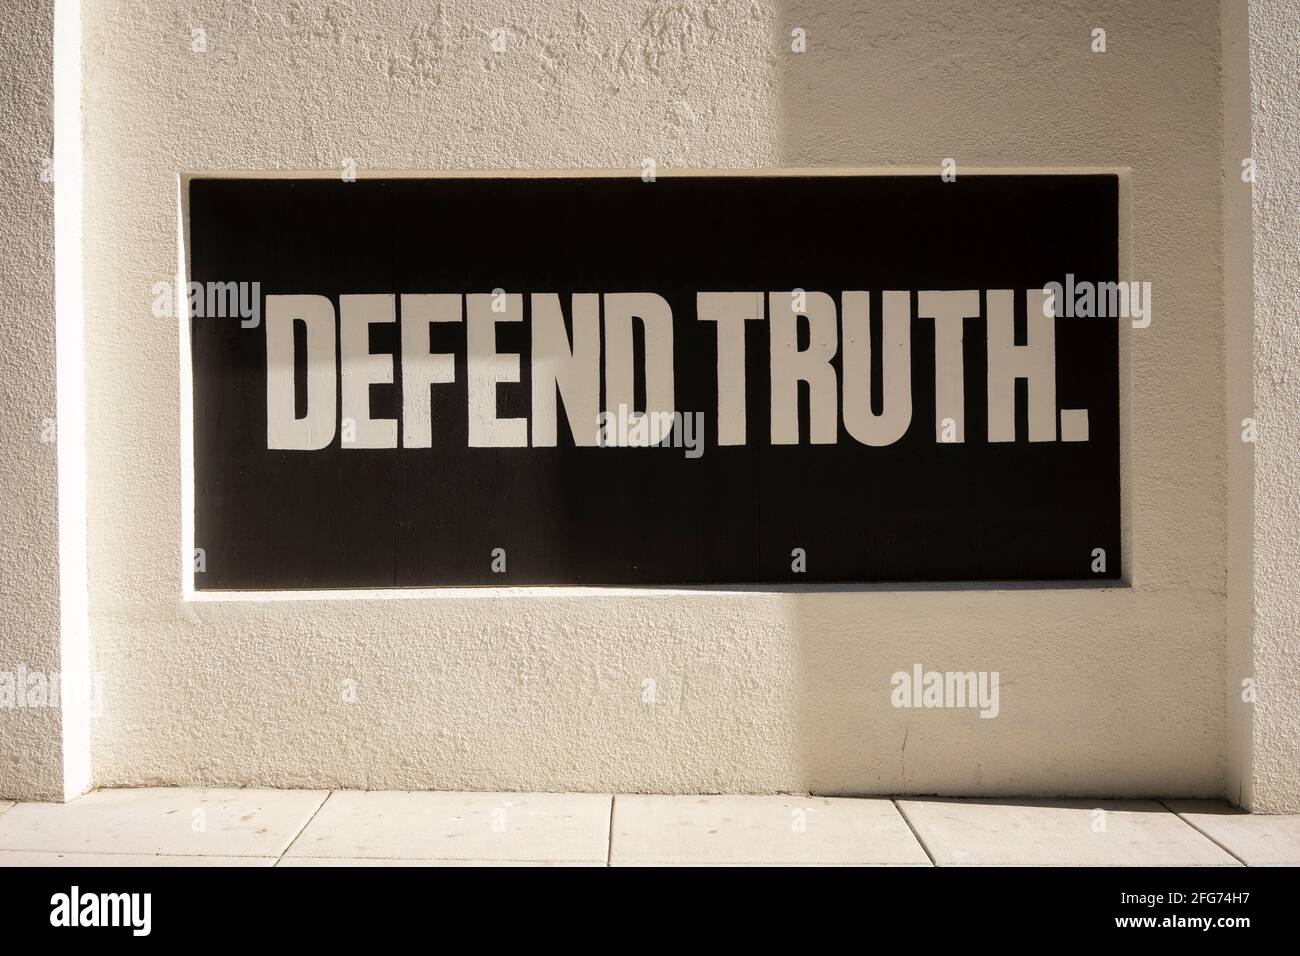 Defend Truth. Positive slogan painted on boarded-up window during protests. Stock Photo